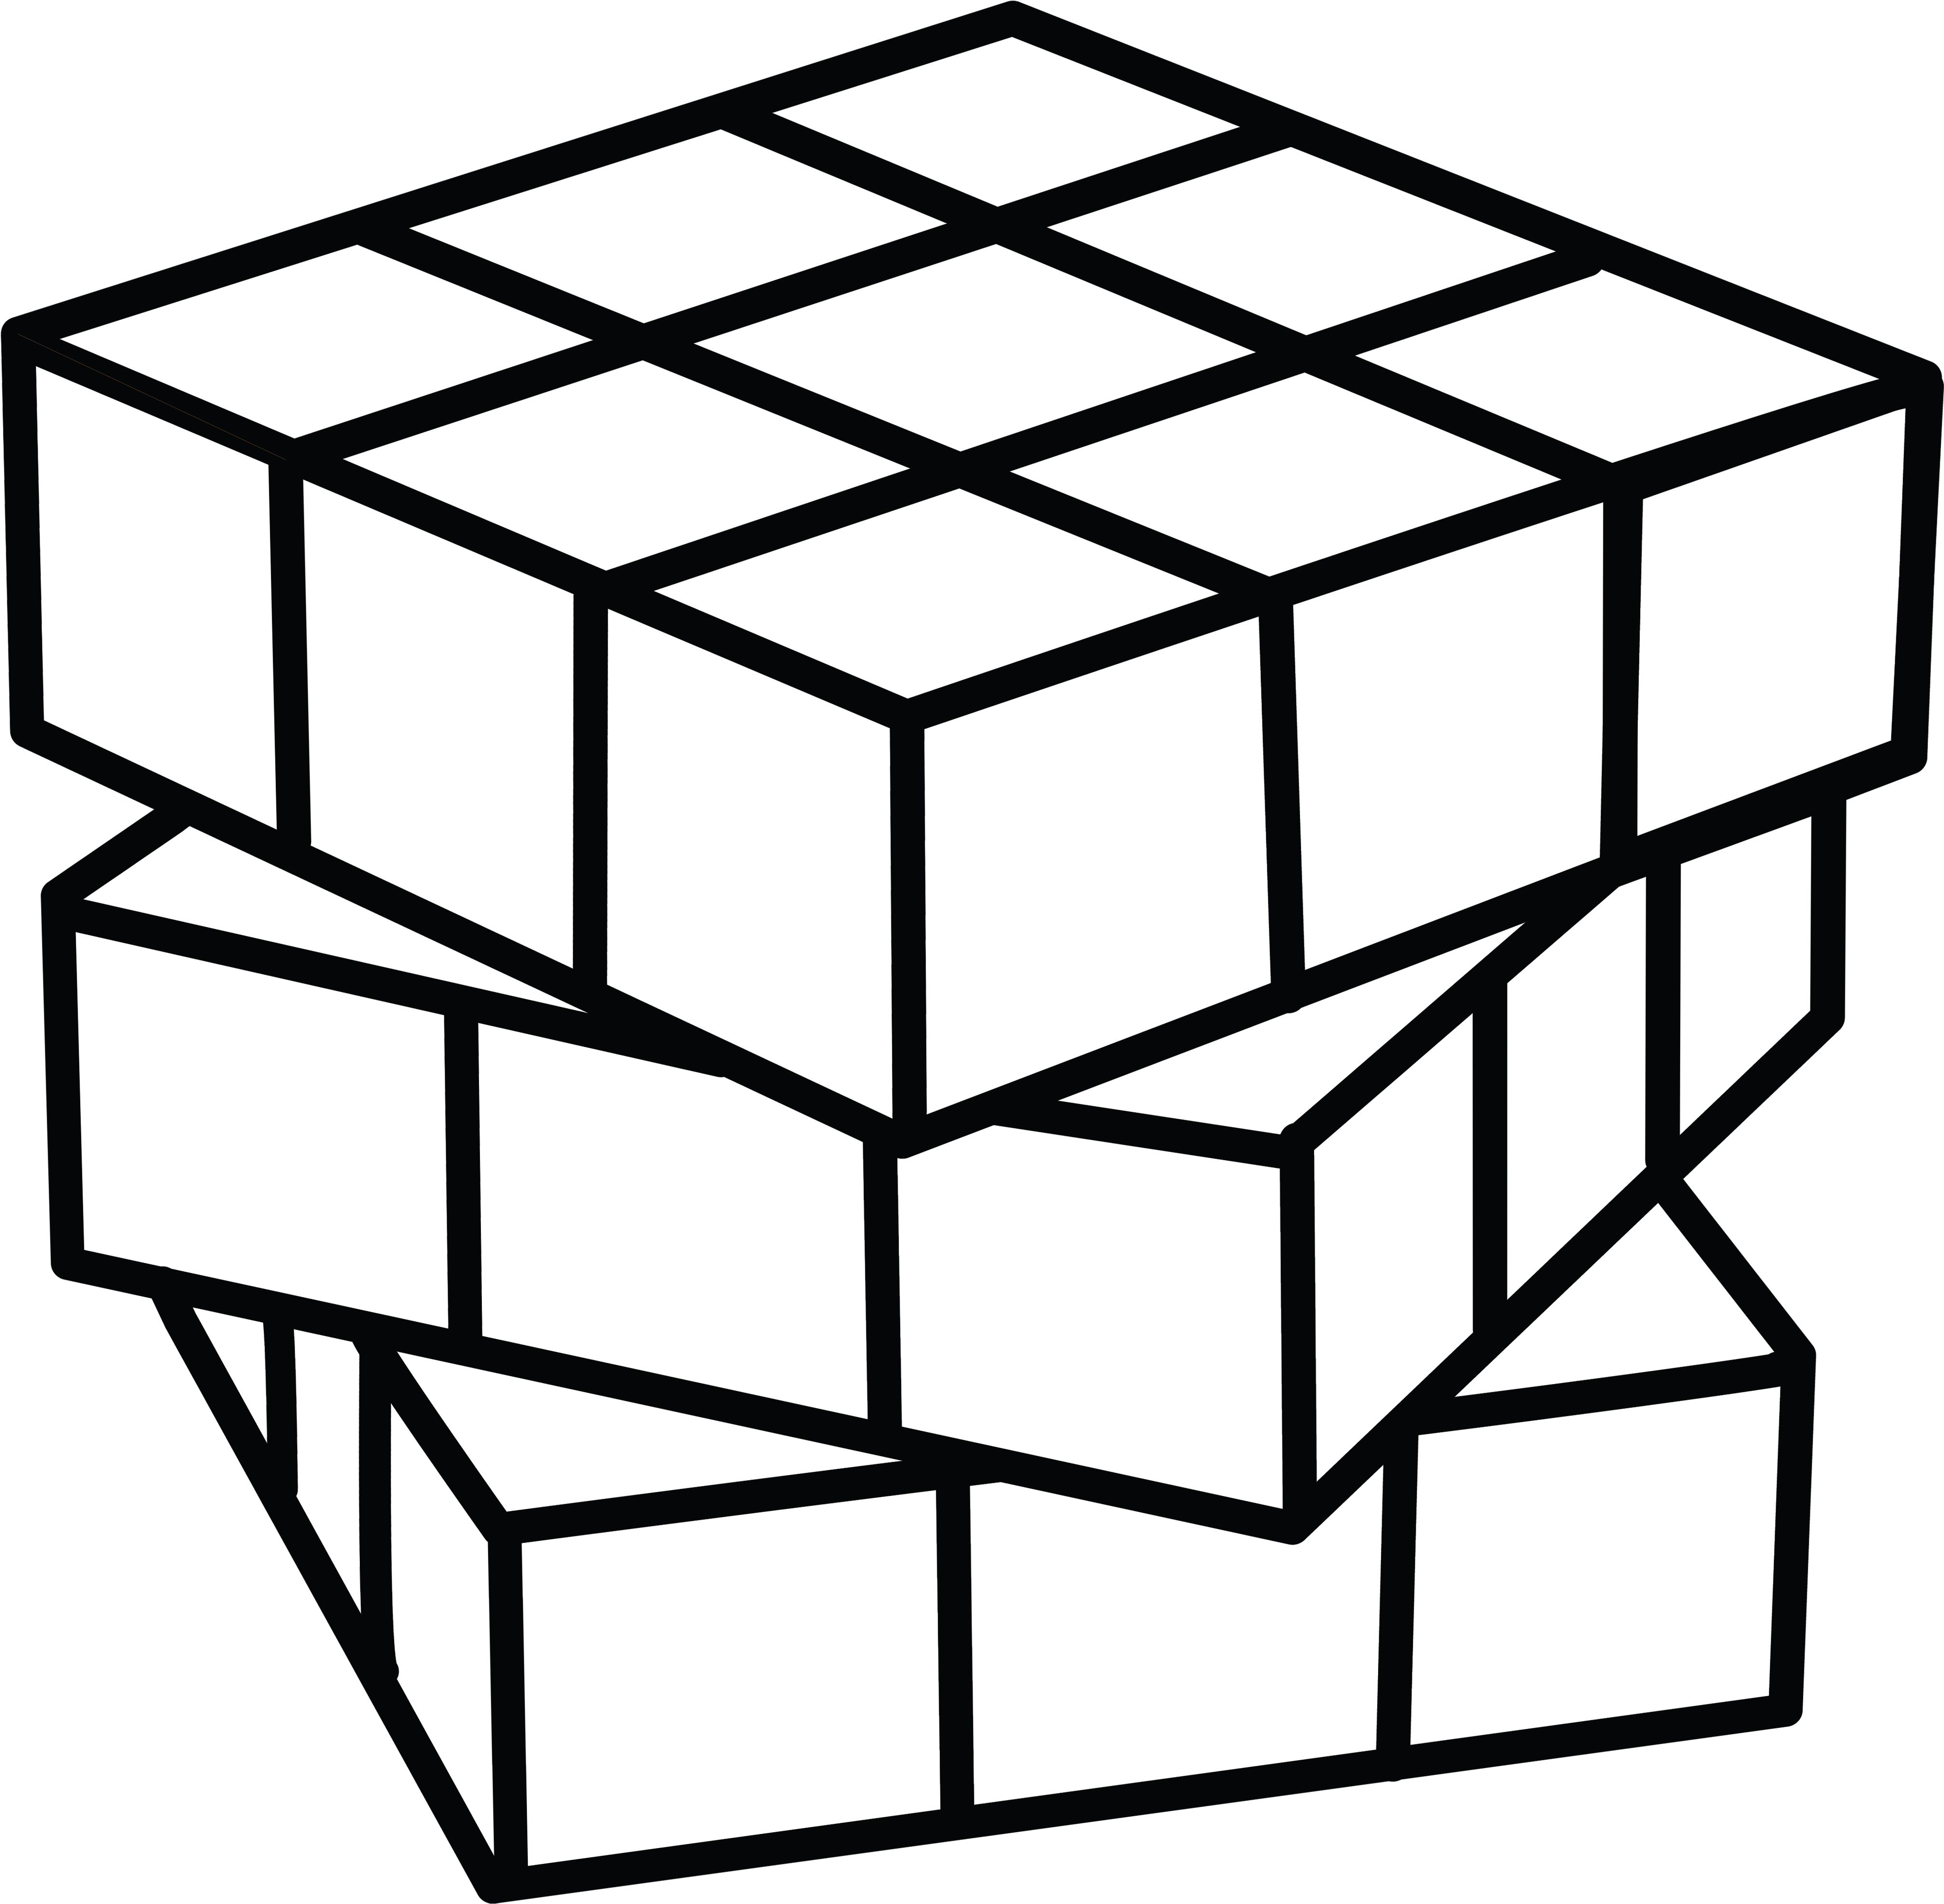 Rubiks Cube Coloring Pages - Best Coloring Pages For Kids in 2020 | Rubiks  cube, Coloring pages, Coloring pages for kids